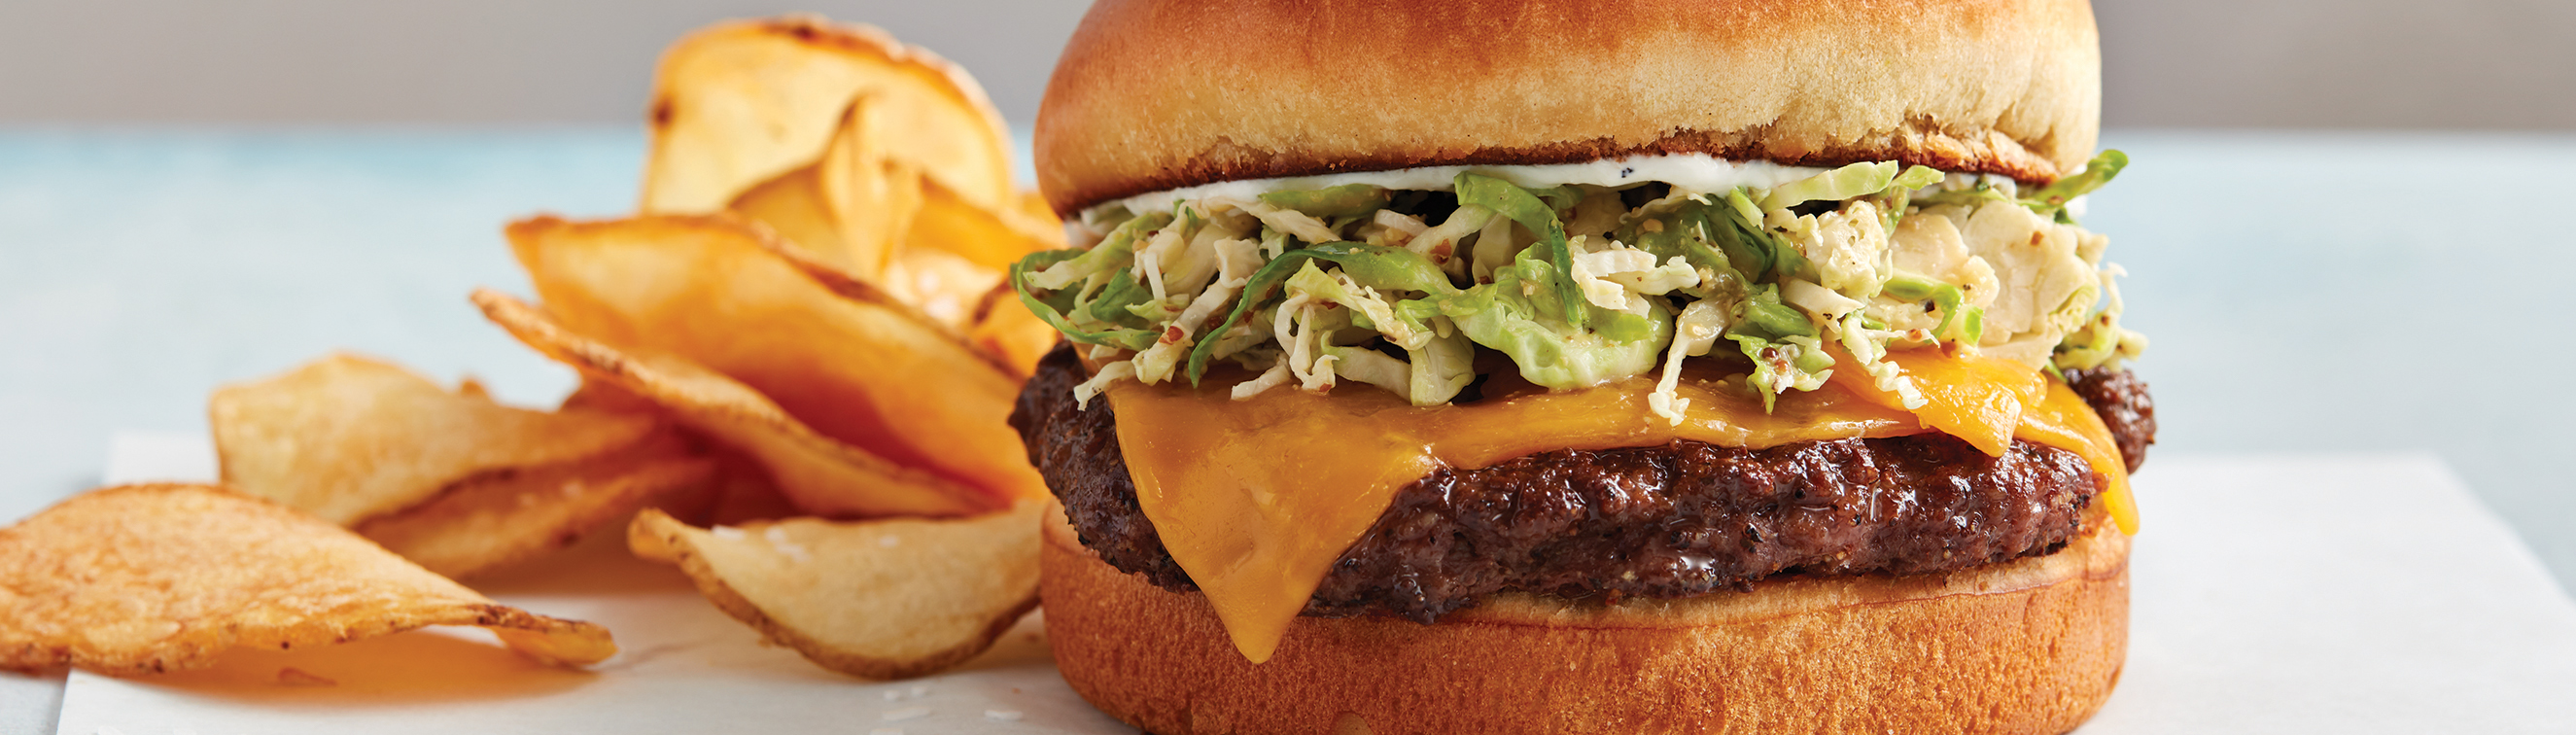 A quarter-pound burger with Cheddar cheese, maple Brussels sprout slaw and horseradish aioli served with house chips.